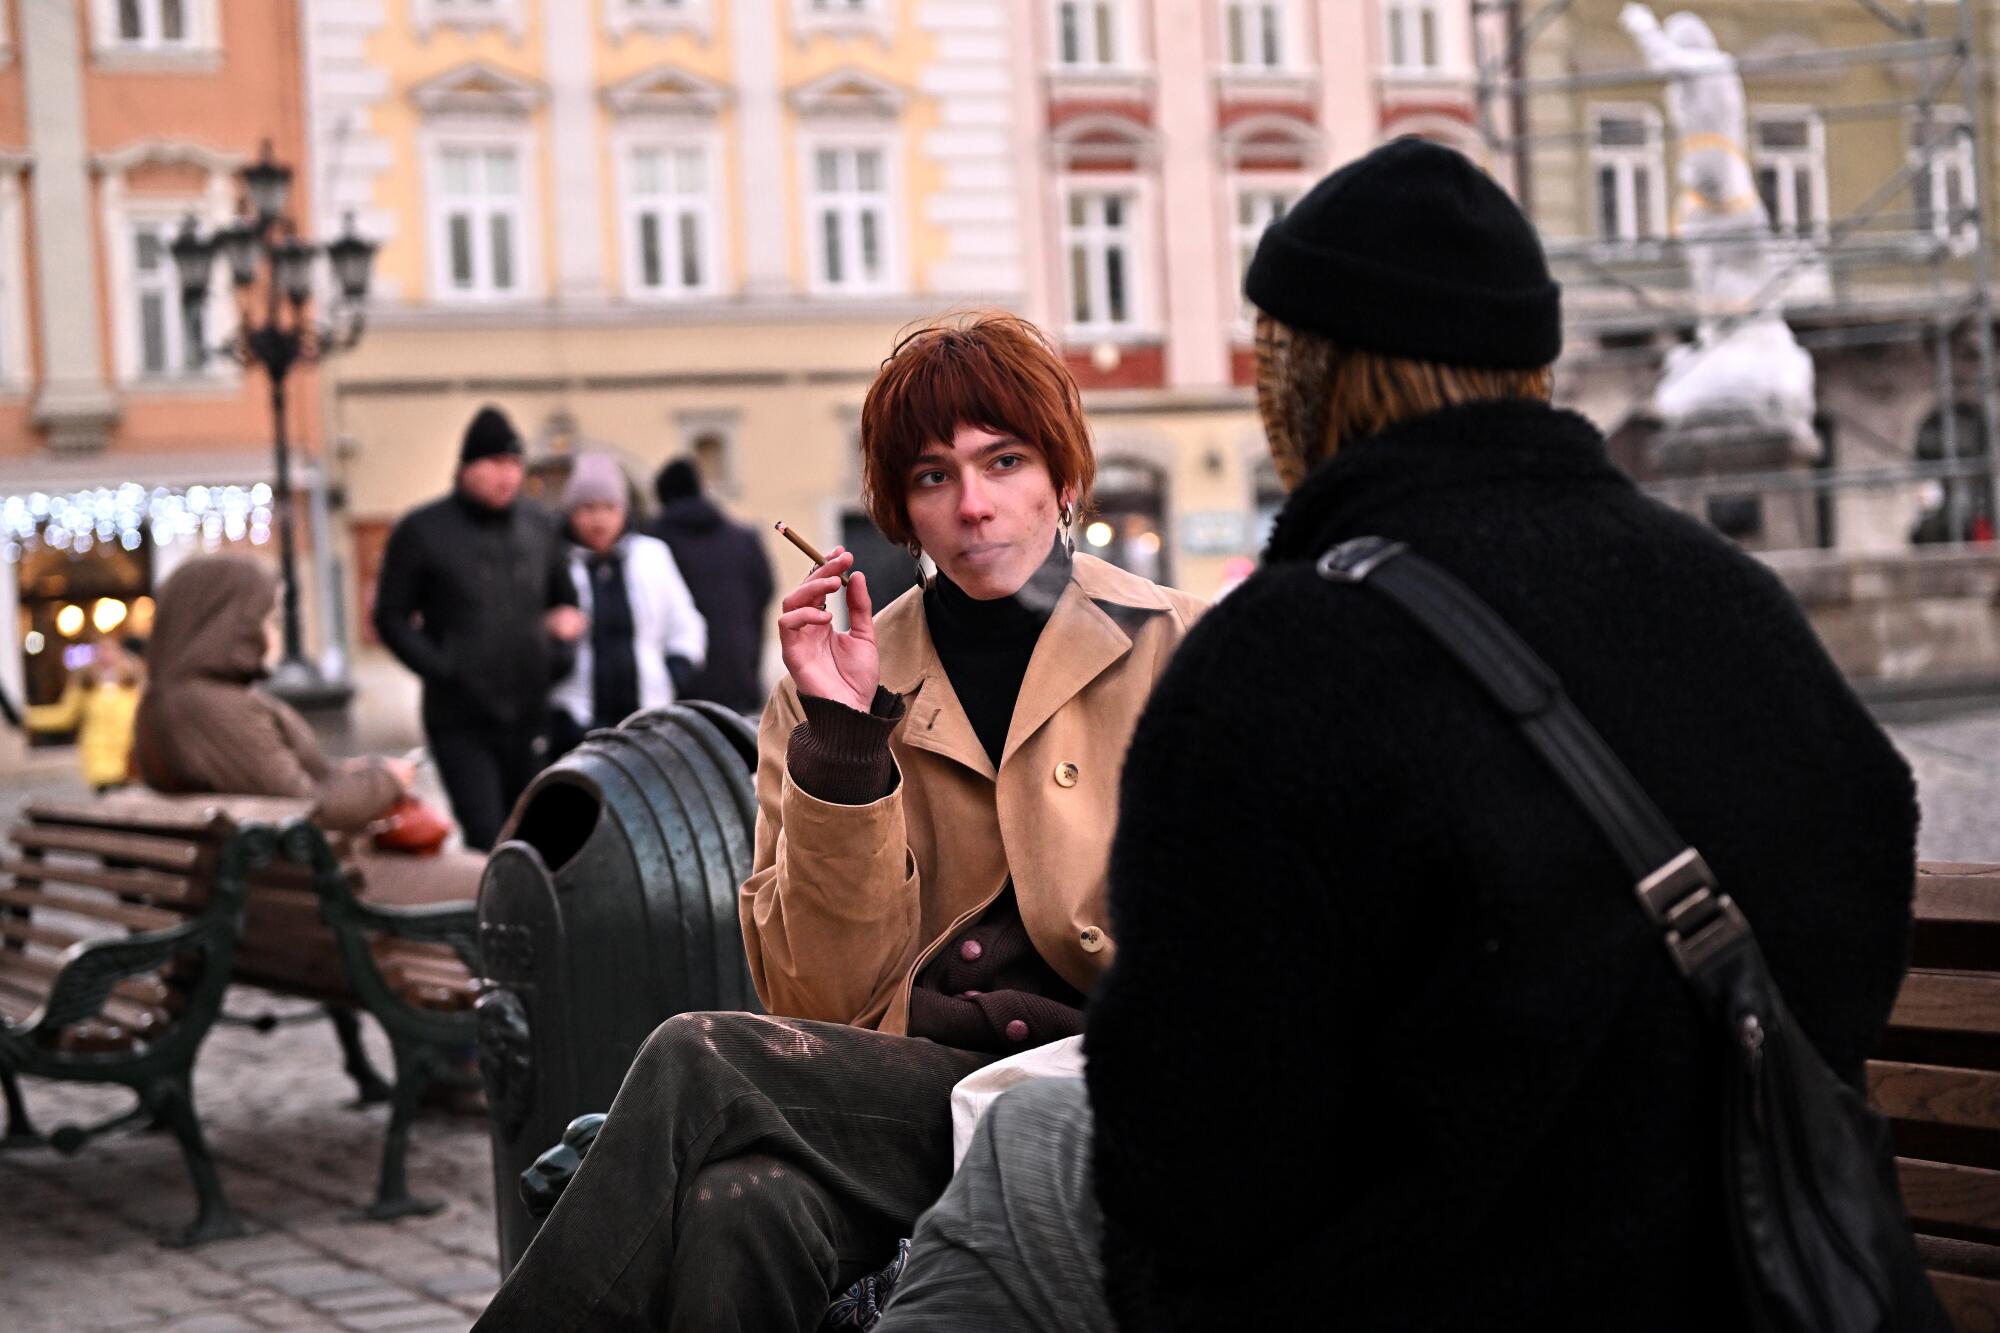 A woman holding a cigarette faces a second person on a bench  